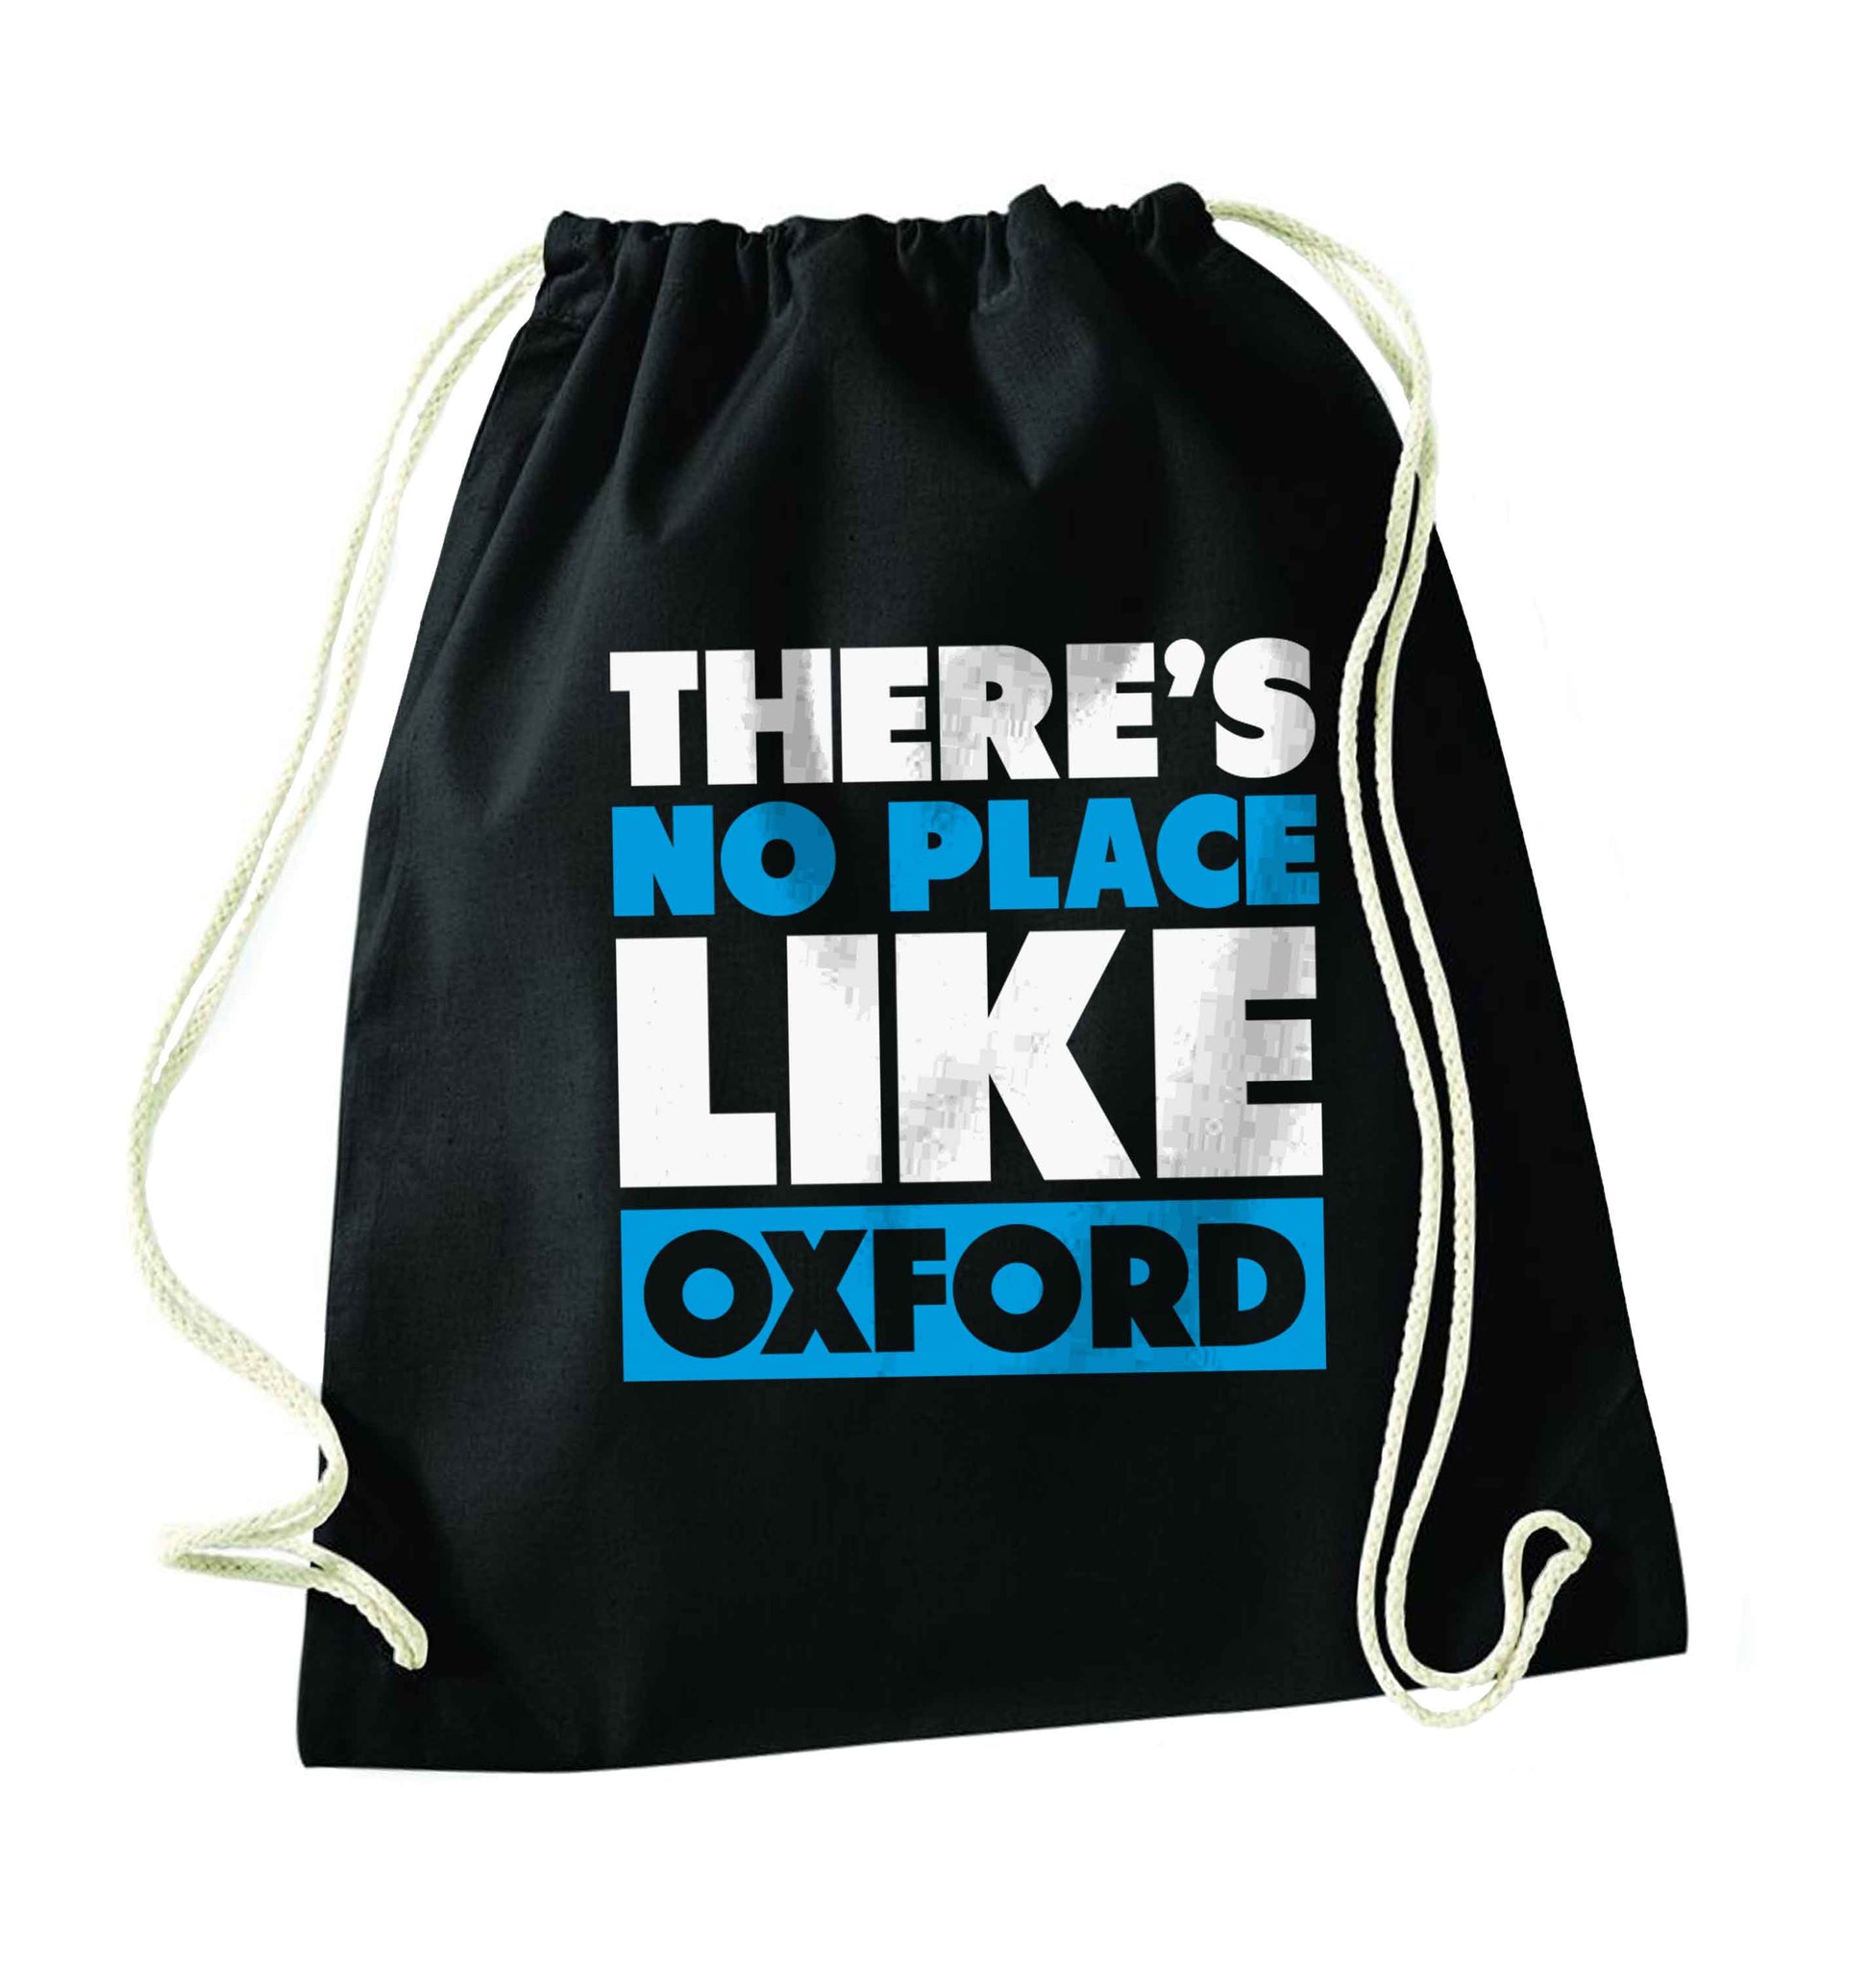 There's no place like Oxford black drawstring bag